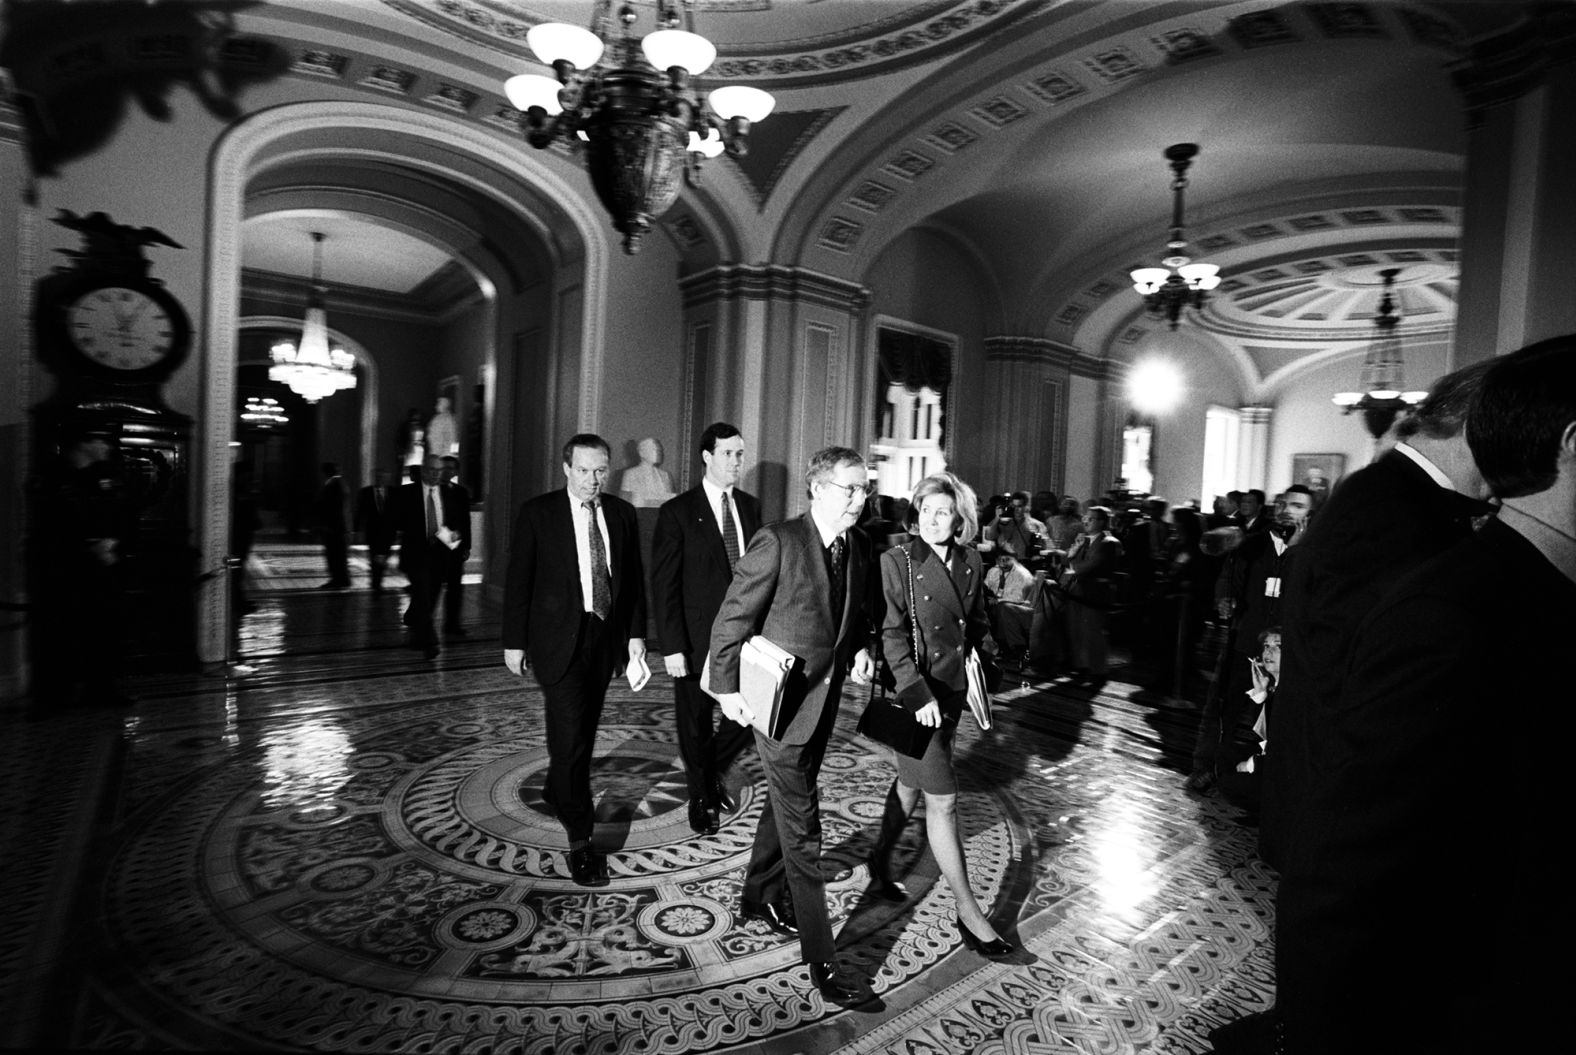 McConnell and Sen. Kay Bailey Hutchison walk in a Capitol hallway during the Senate impeachment trial of President Bill Clinton in February 1999.